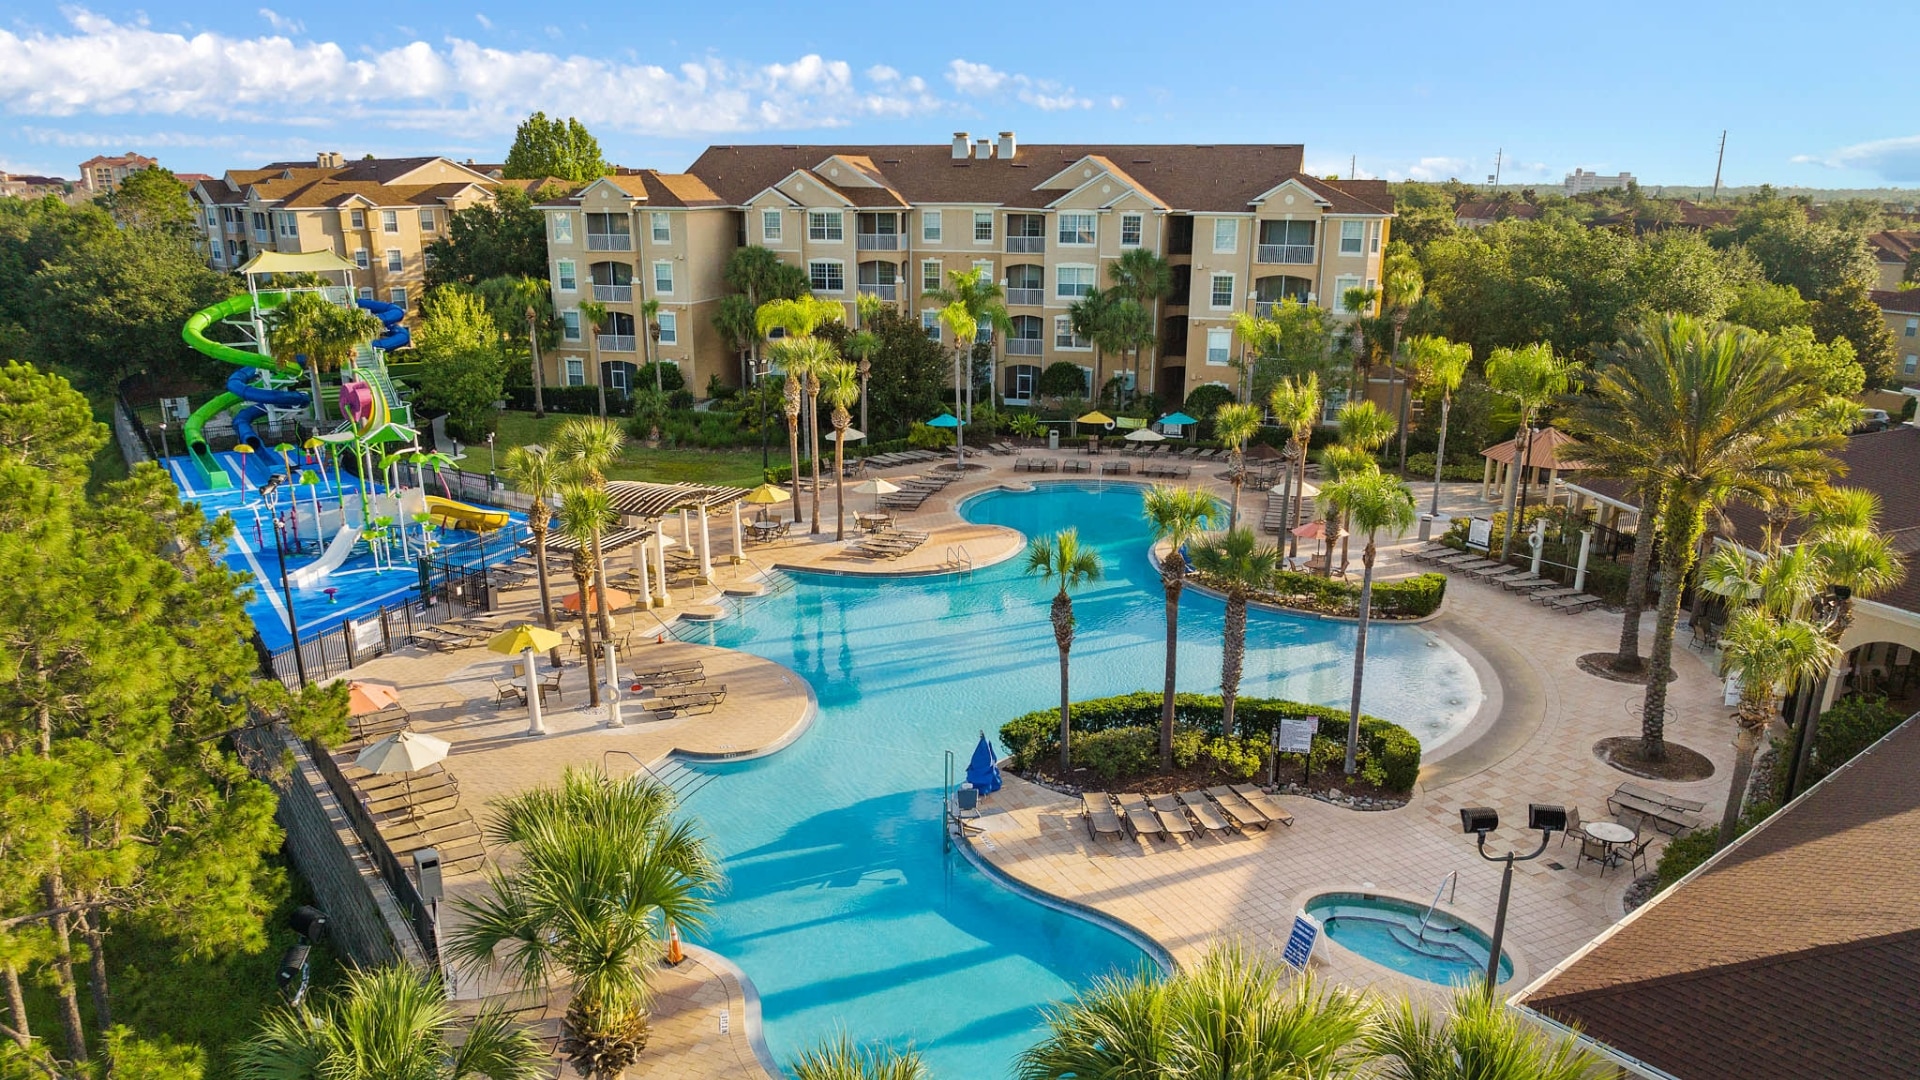 Book a Stay in Orlando This Winter